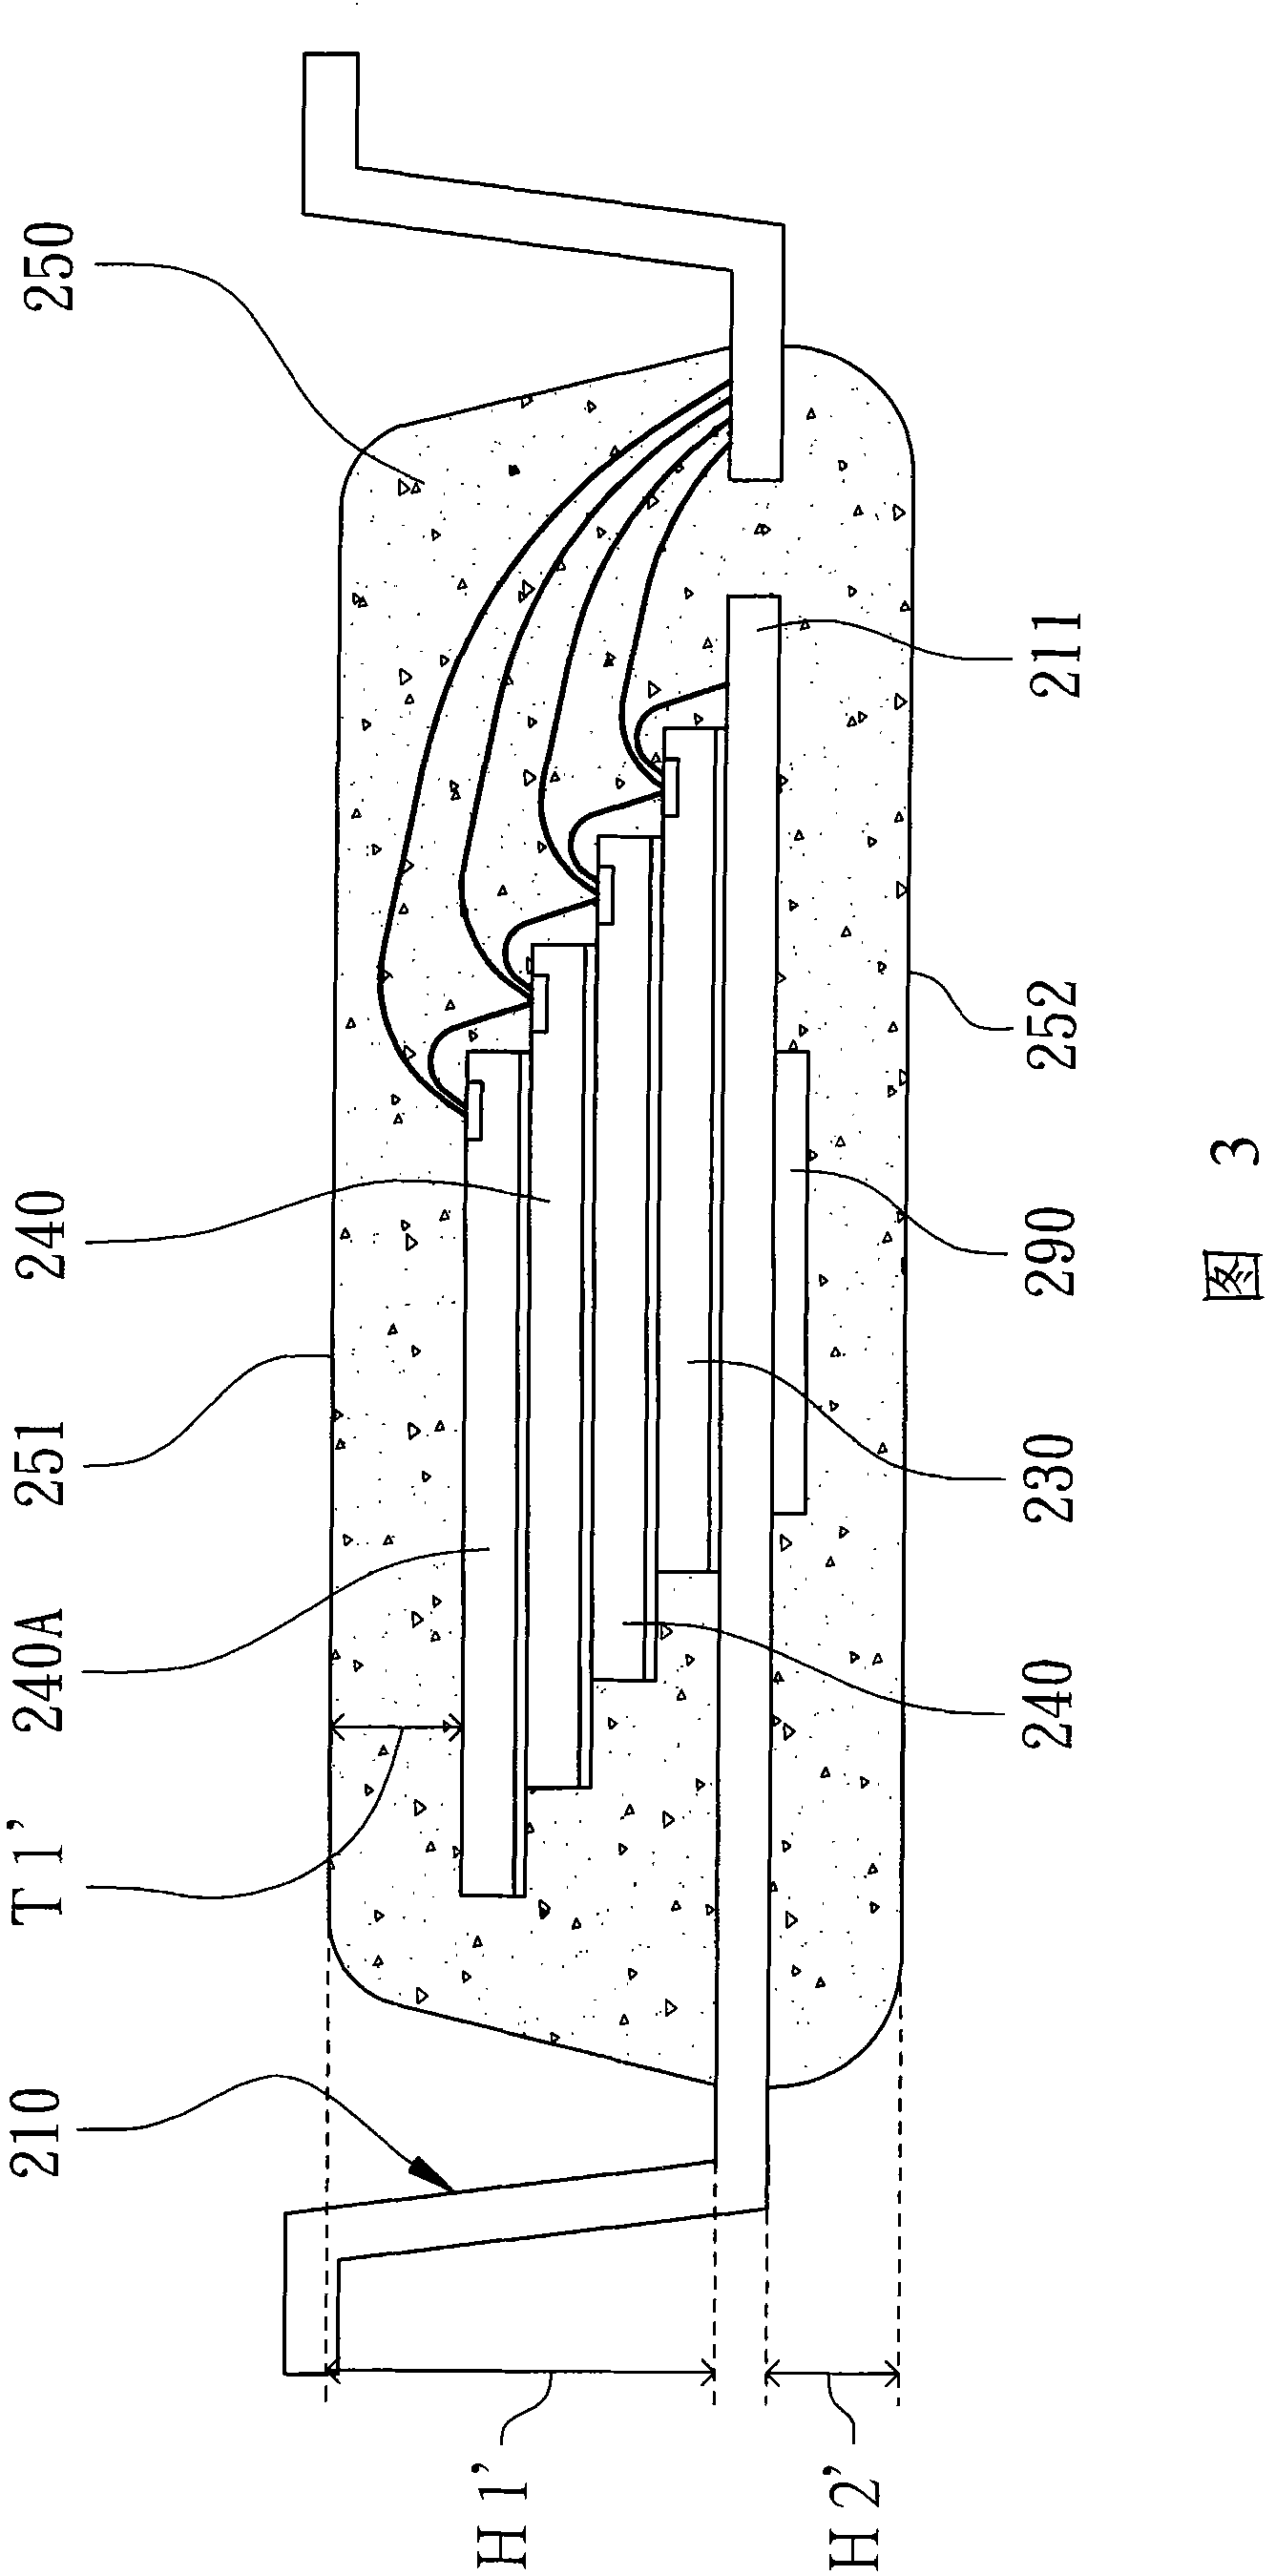 Multichip package structure capable of arranging chips on pins